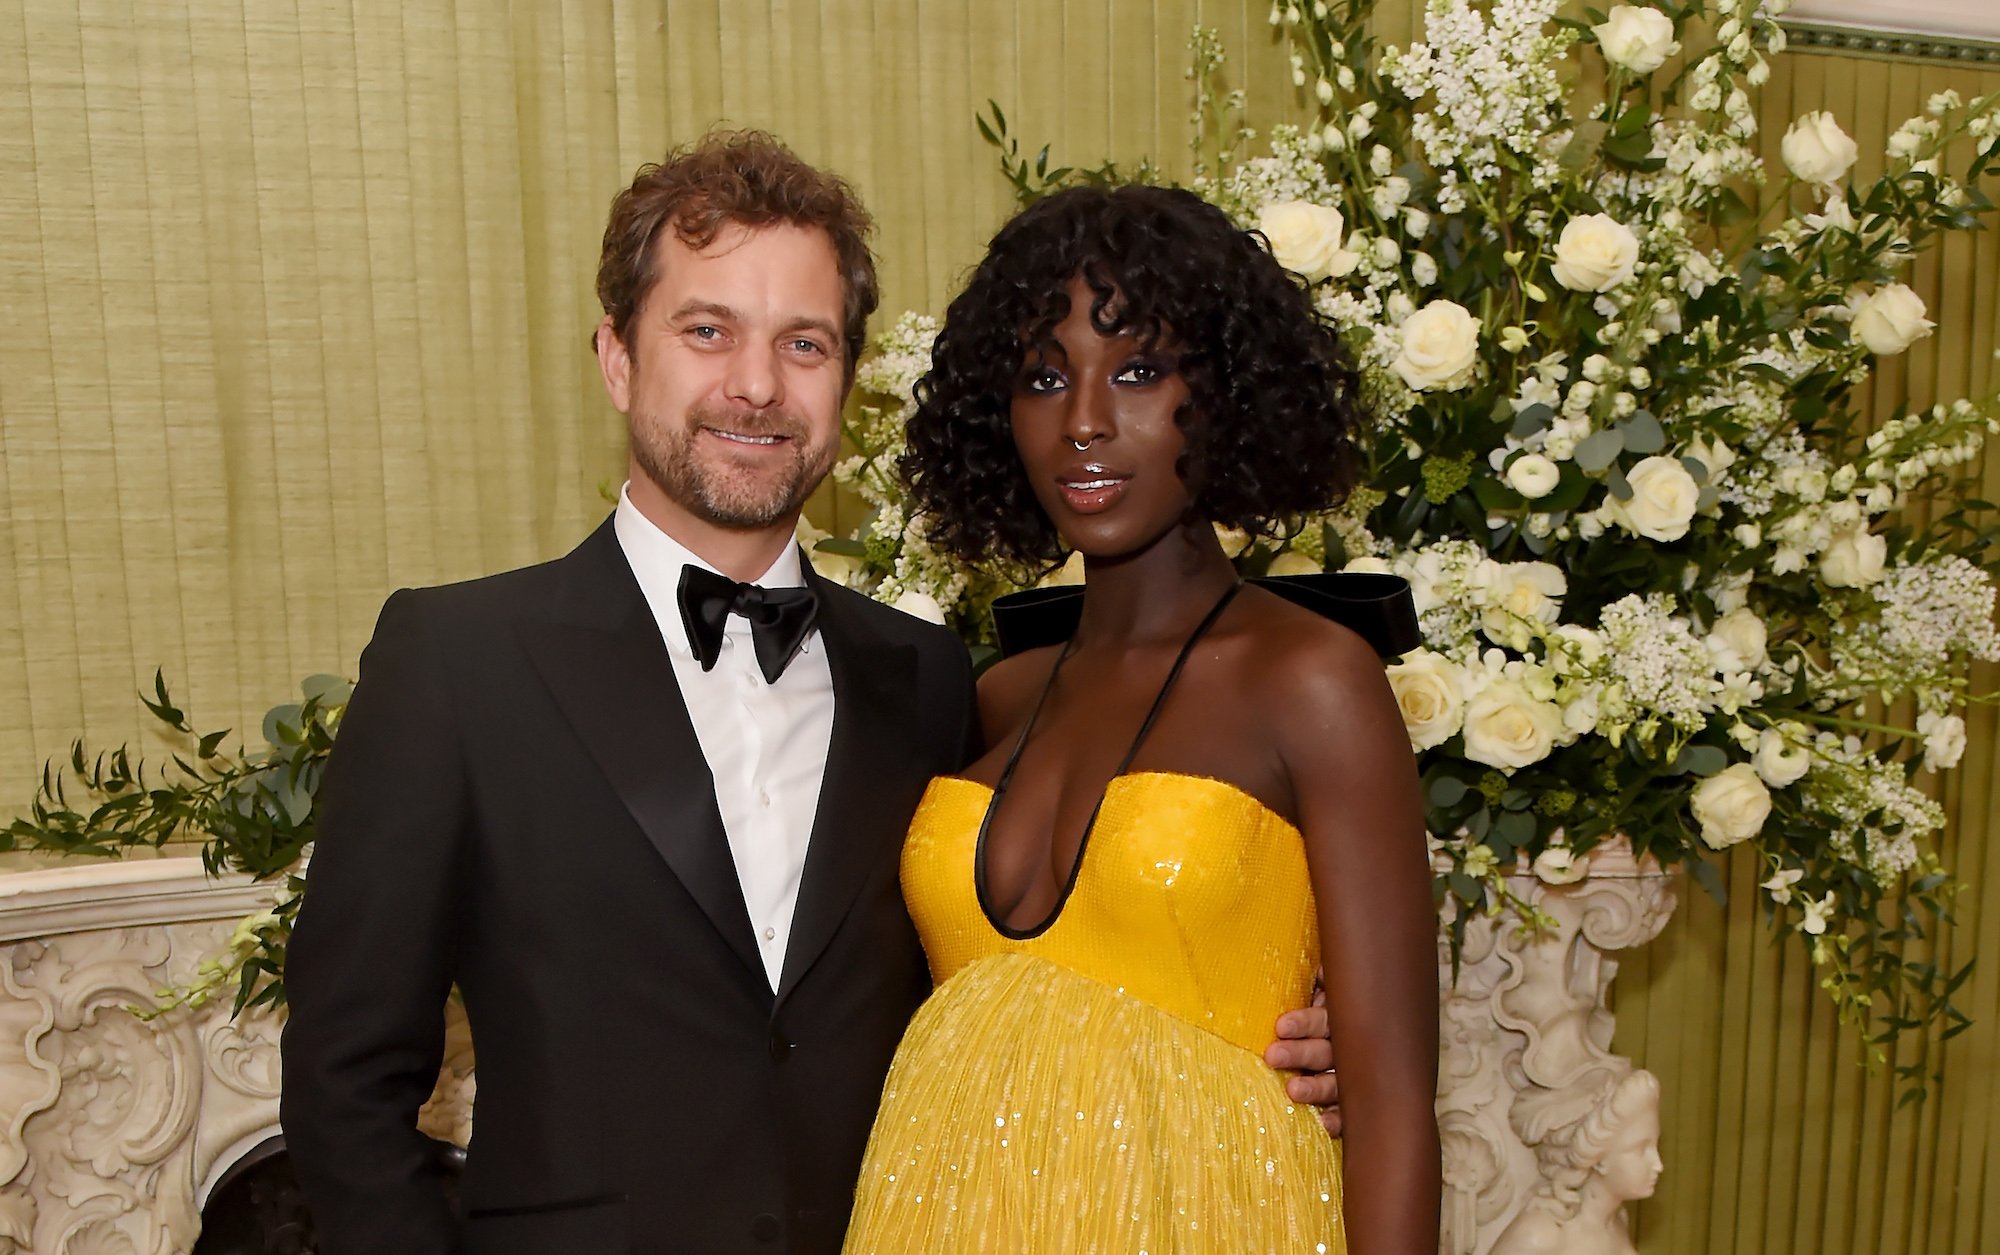 Joshua Jackson and Jodie Turner-Smith smiling in front of a white floral arrangement